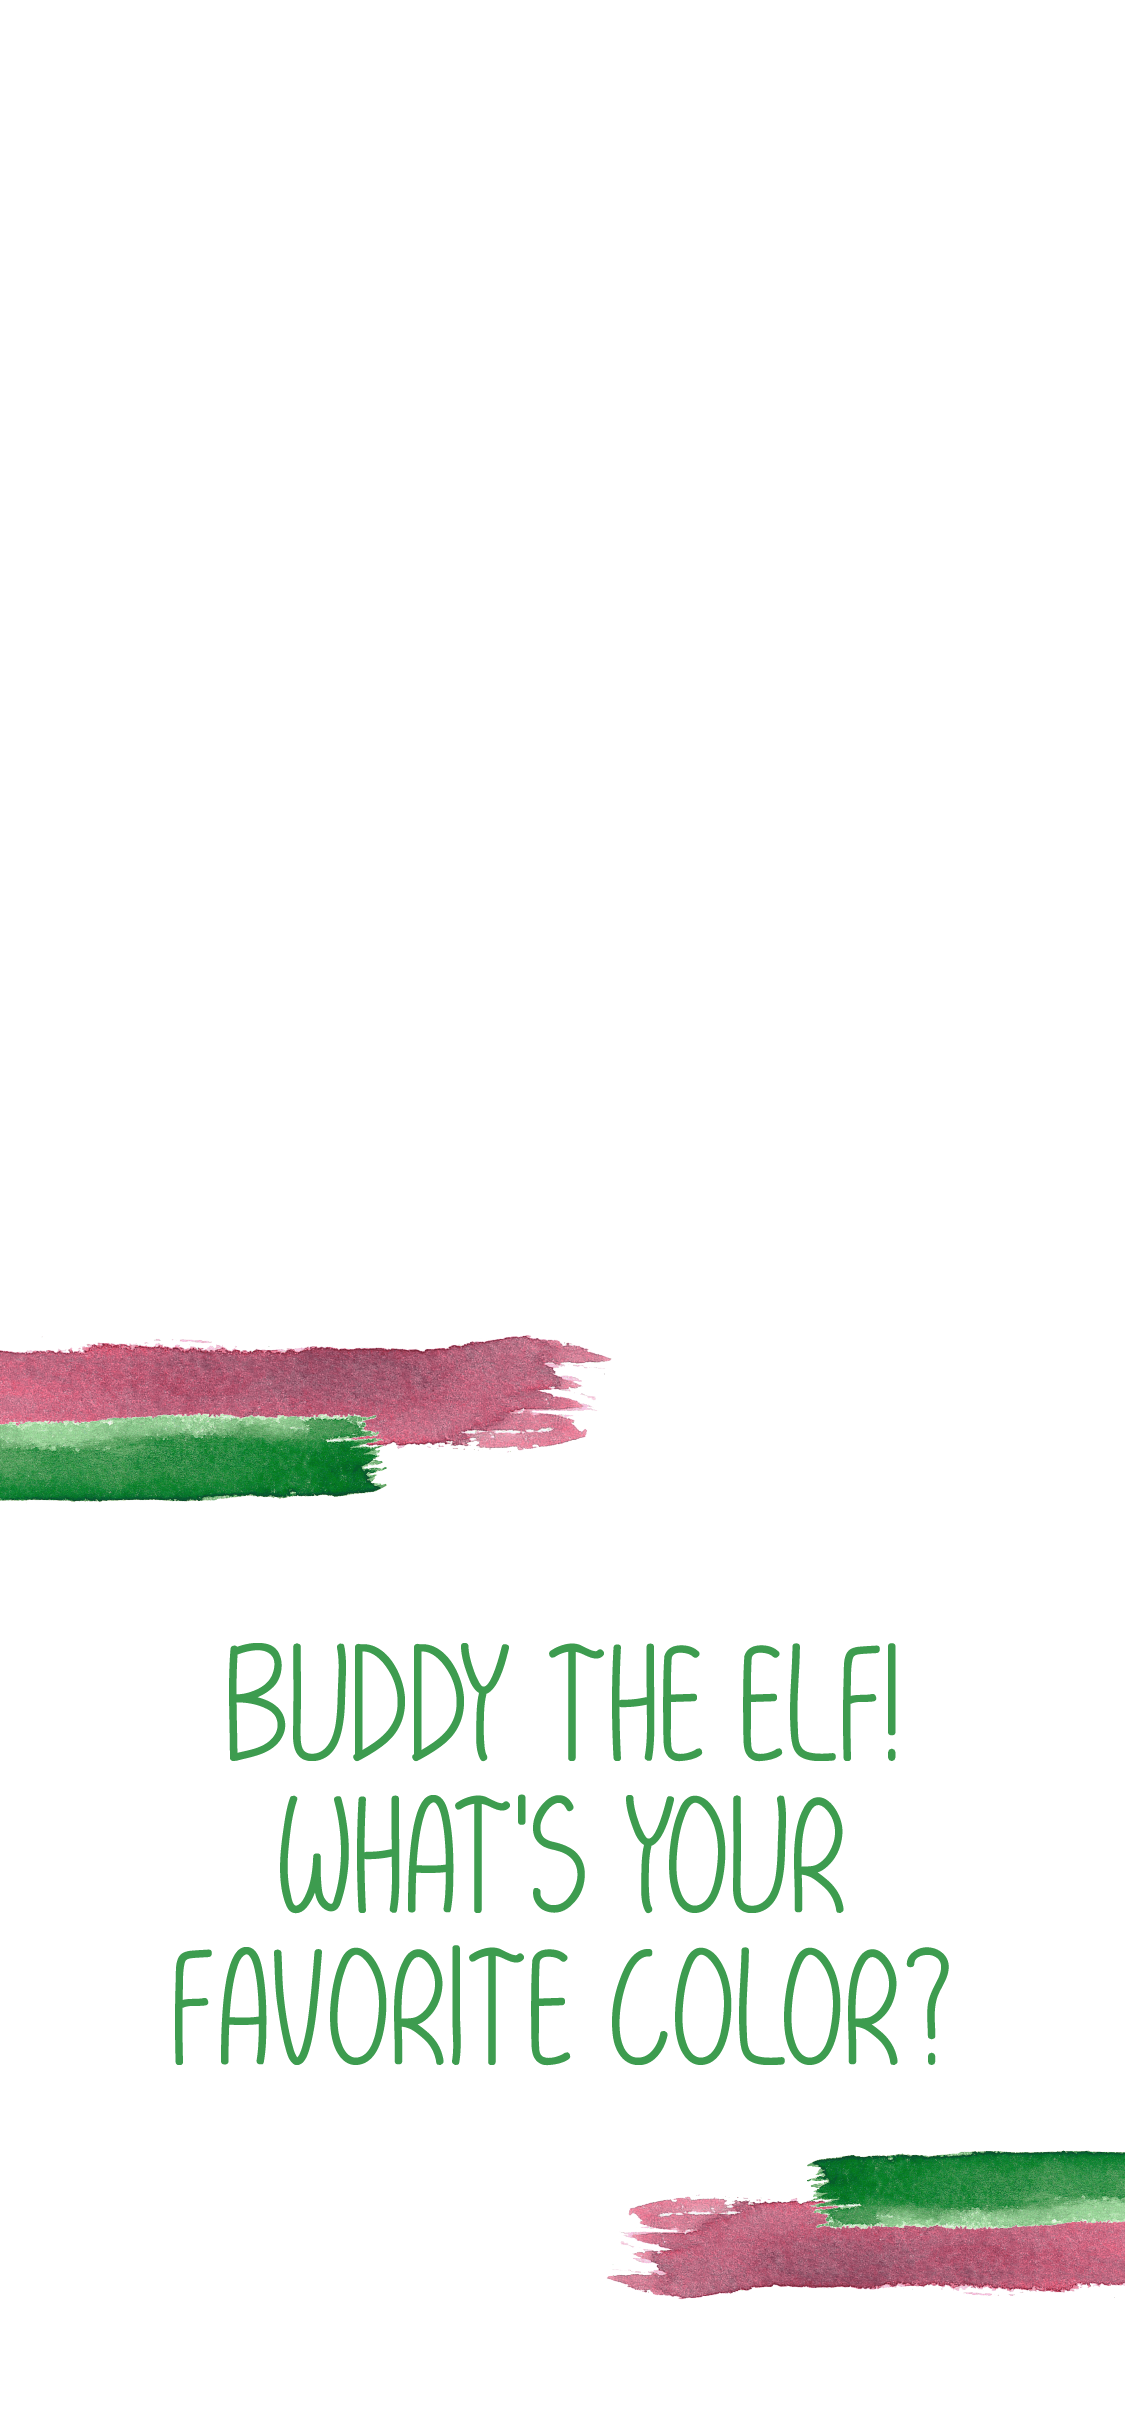 Buddy the Elf iPhone Wallpaper. iPhone wallpaper, Buddy the elf, Great christmas movies